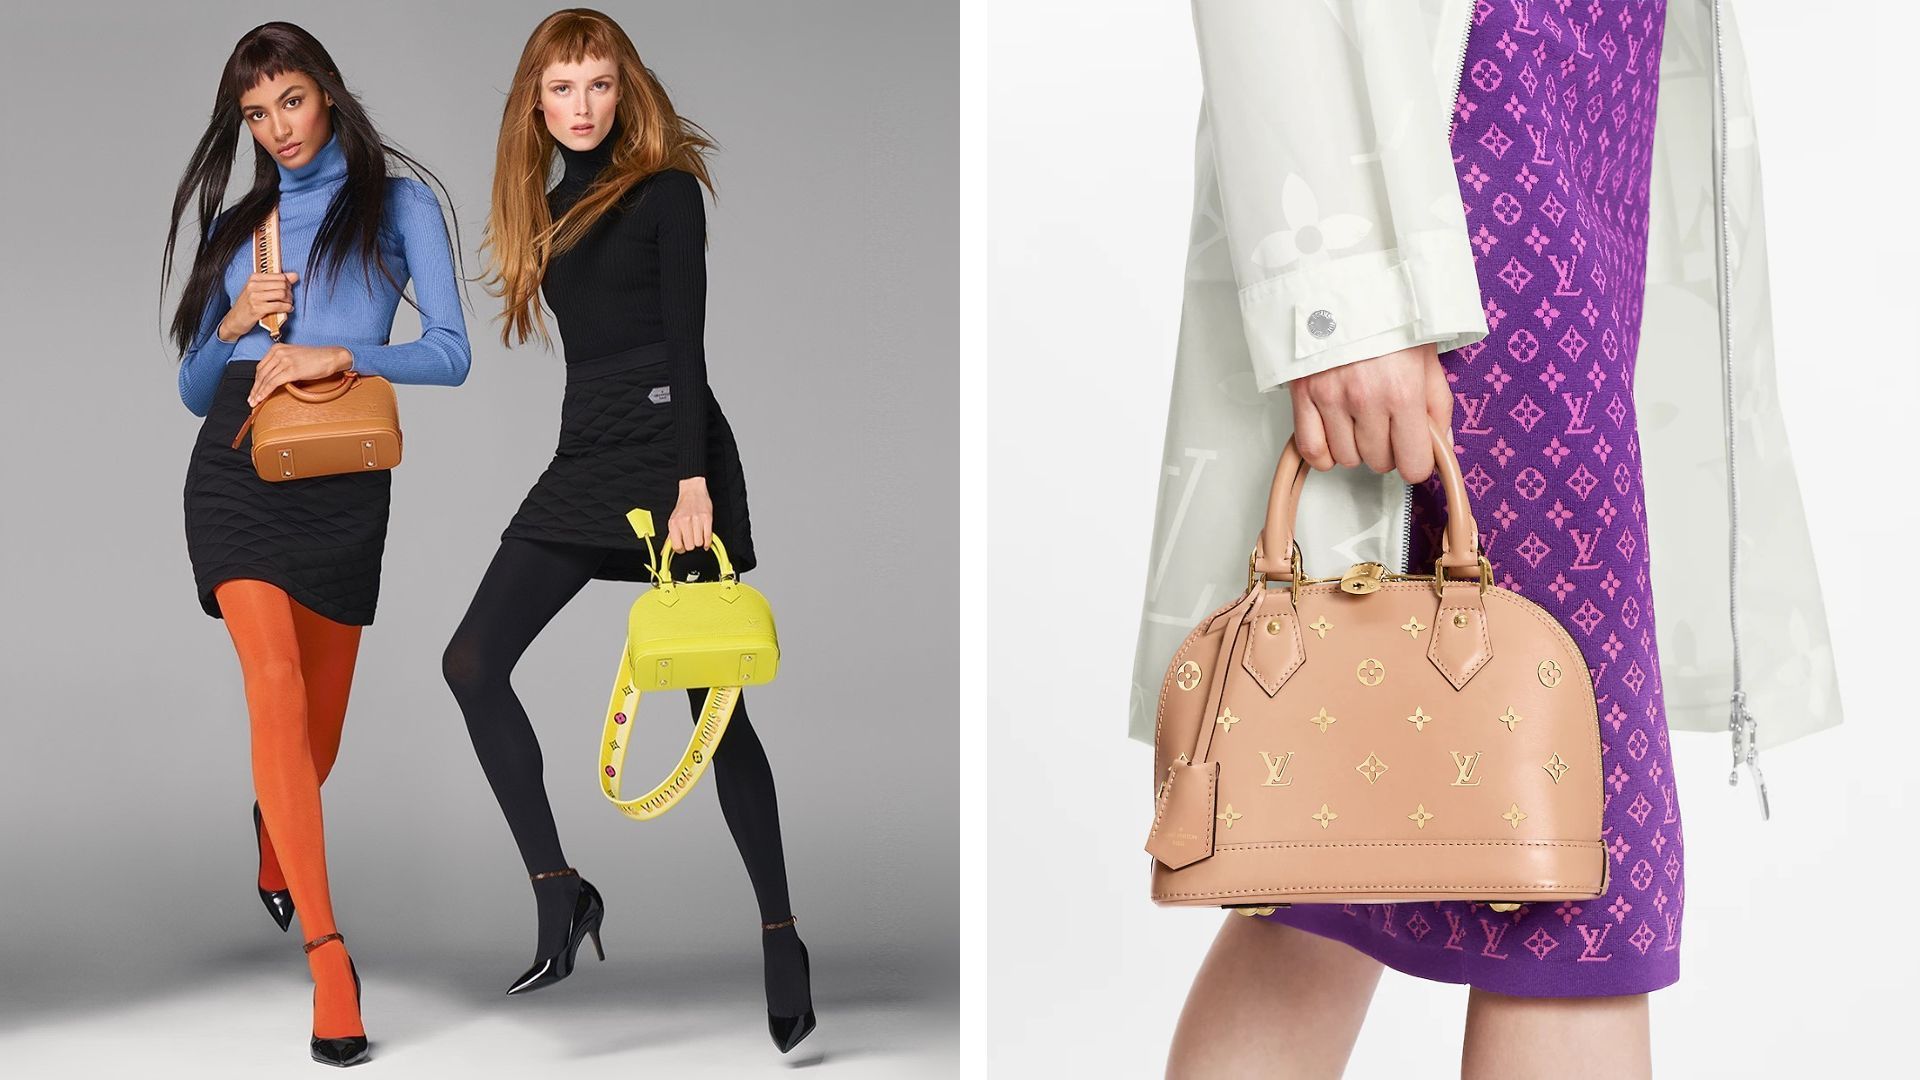 Louis Vuitton Puts All Eyes On Its Iconic Alma Bag This Spring - PurseBlog